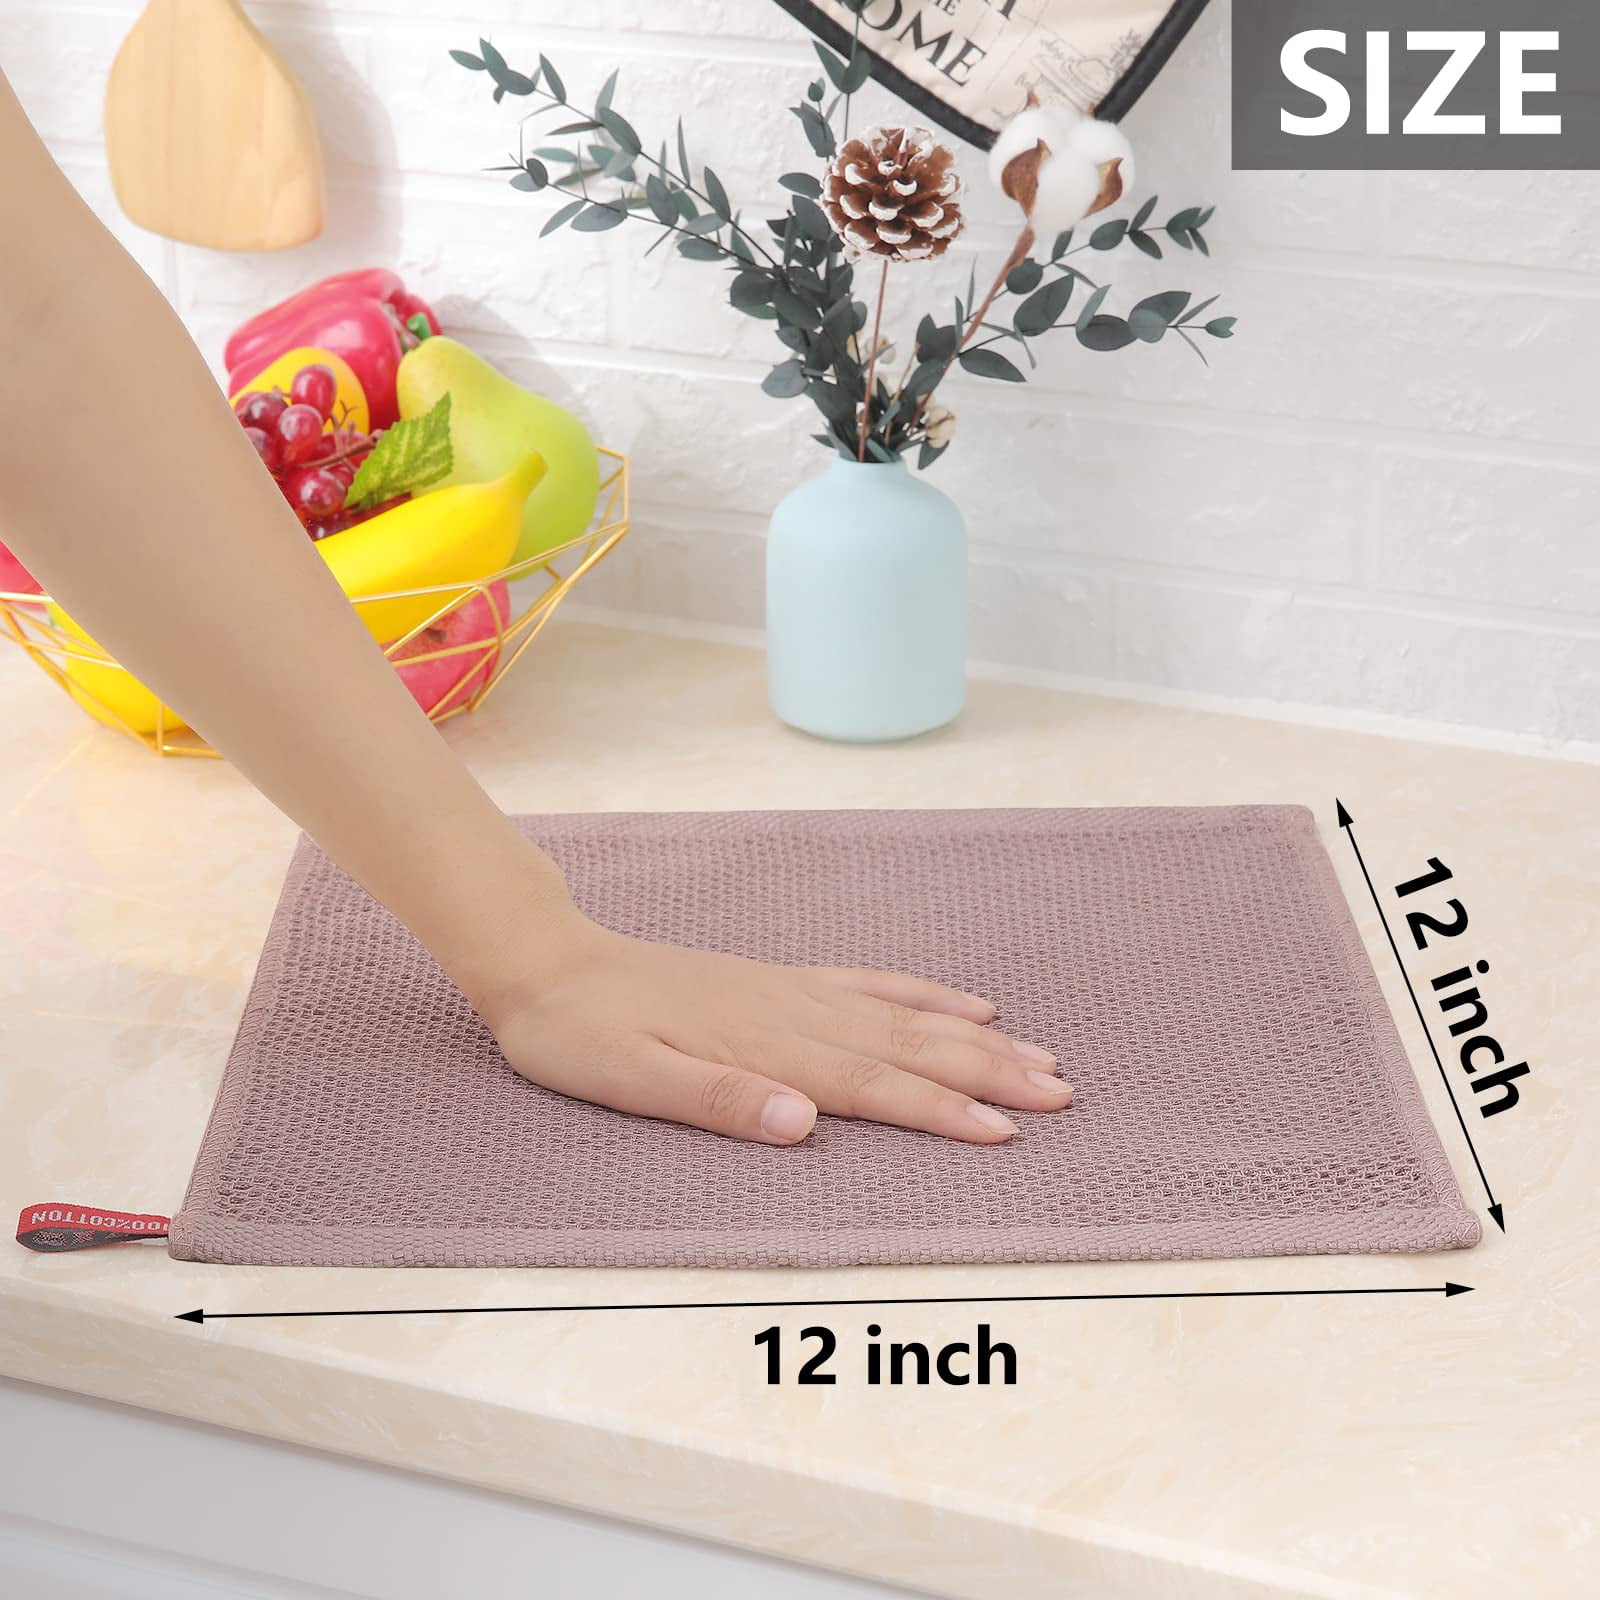 Oeleky 100% Cotton Kitchen Dish Cloths for Washing Dishes, 12x12 Inches Dish Rags, Absorbent Kitchen Cloths Pack of 8, Quick Drying Cleaning Cloths